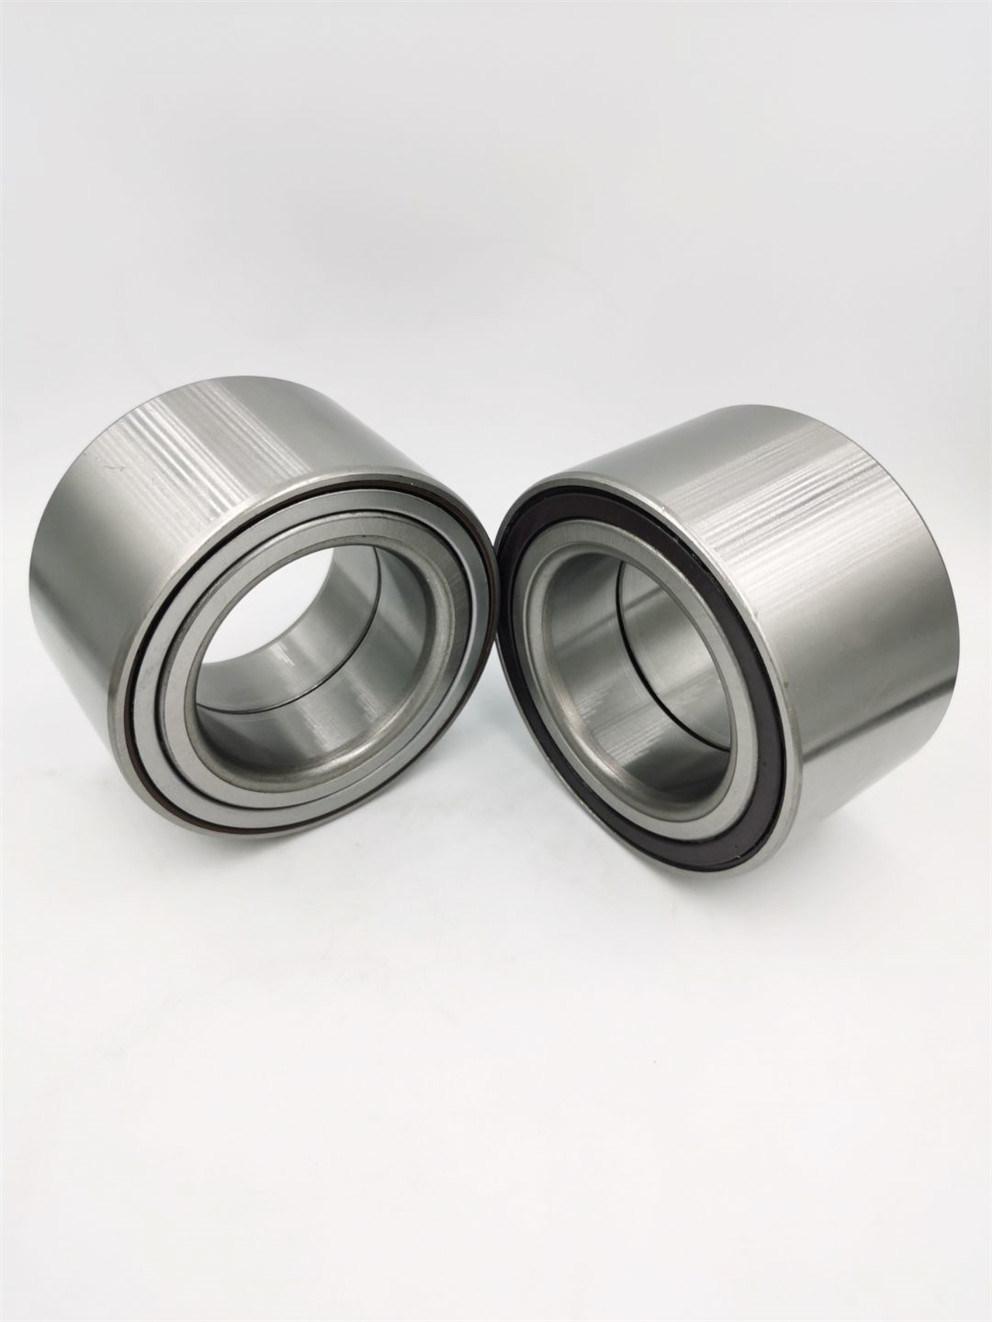 40215-D0100 0009804202 517201001 Vkhb2272 40215-D0100 Auto Bearing for Nissan Audi Auto Parts with Good Quality